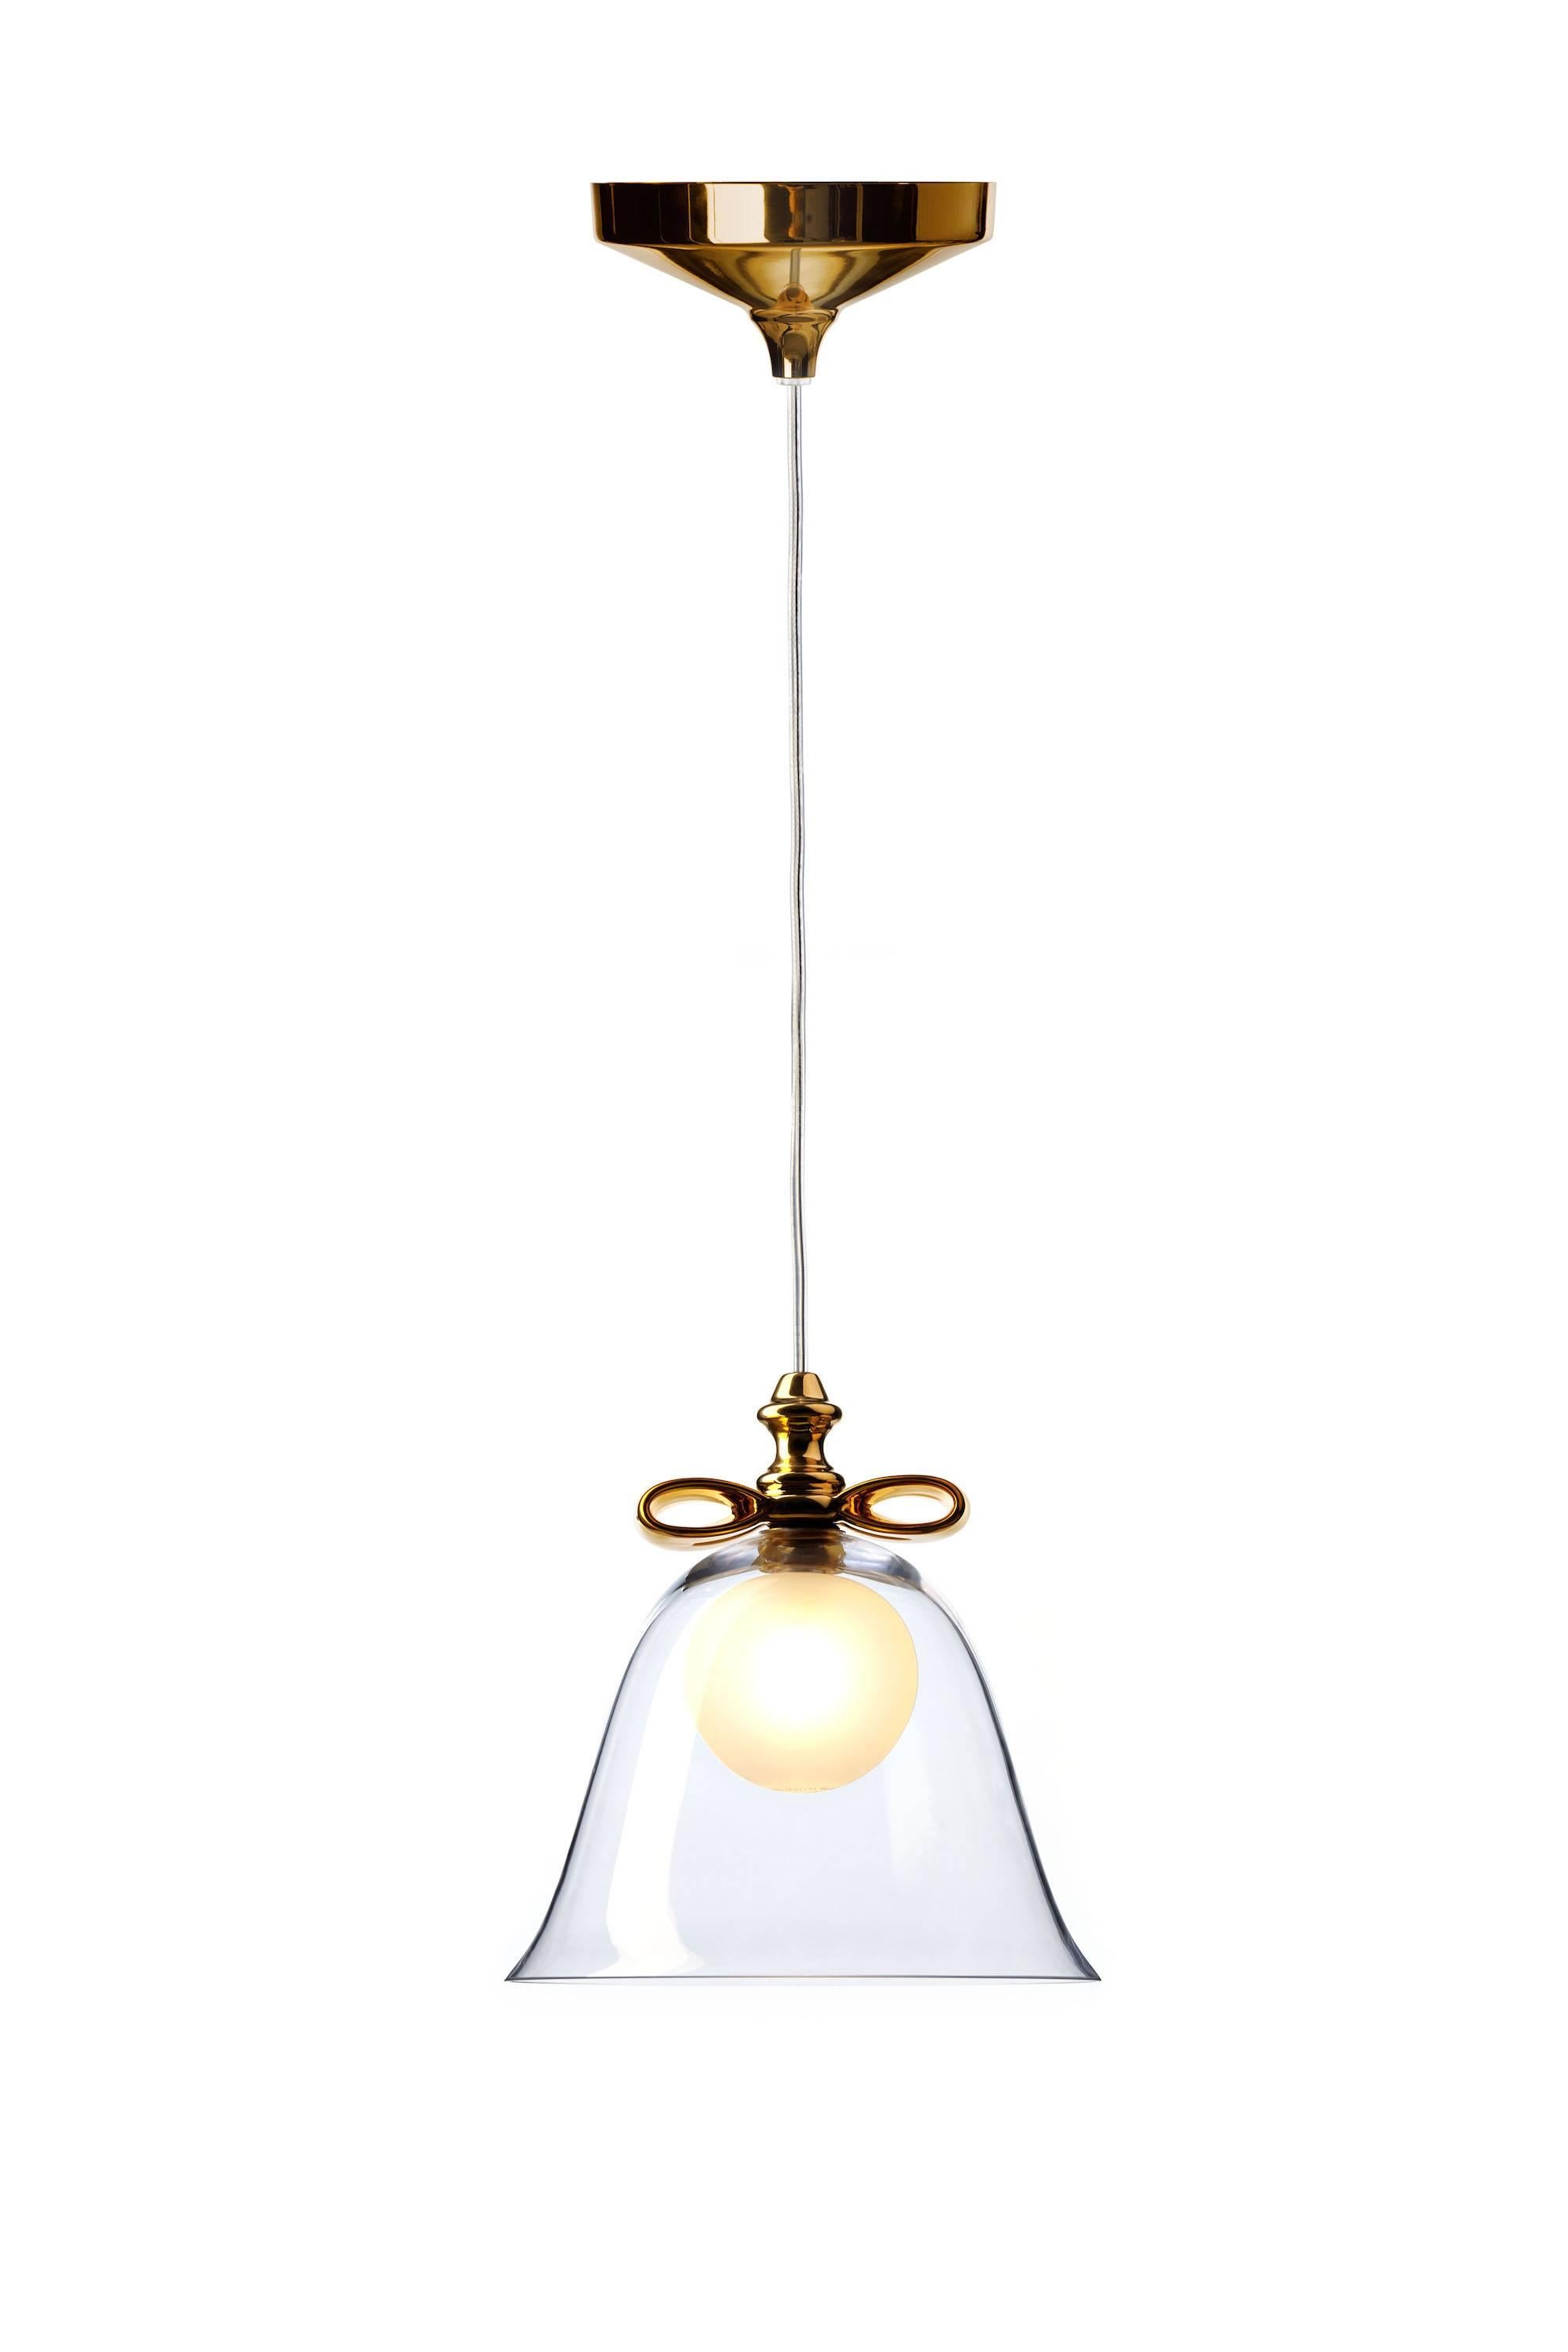 Dutch Moooi Bell Lamp by Marcel Wanders in Mouth Blown Glass with Ceramic Bow For Sale